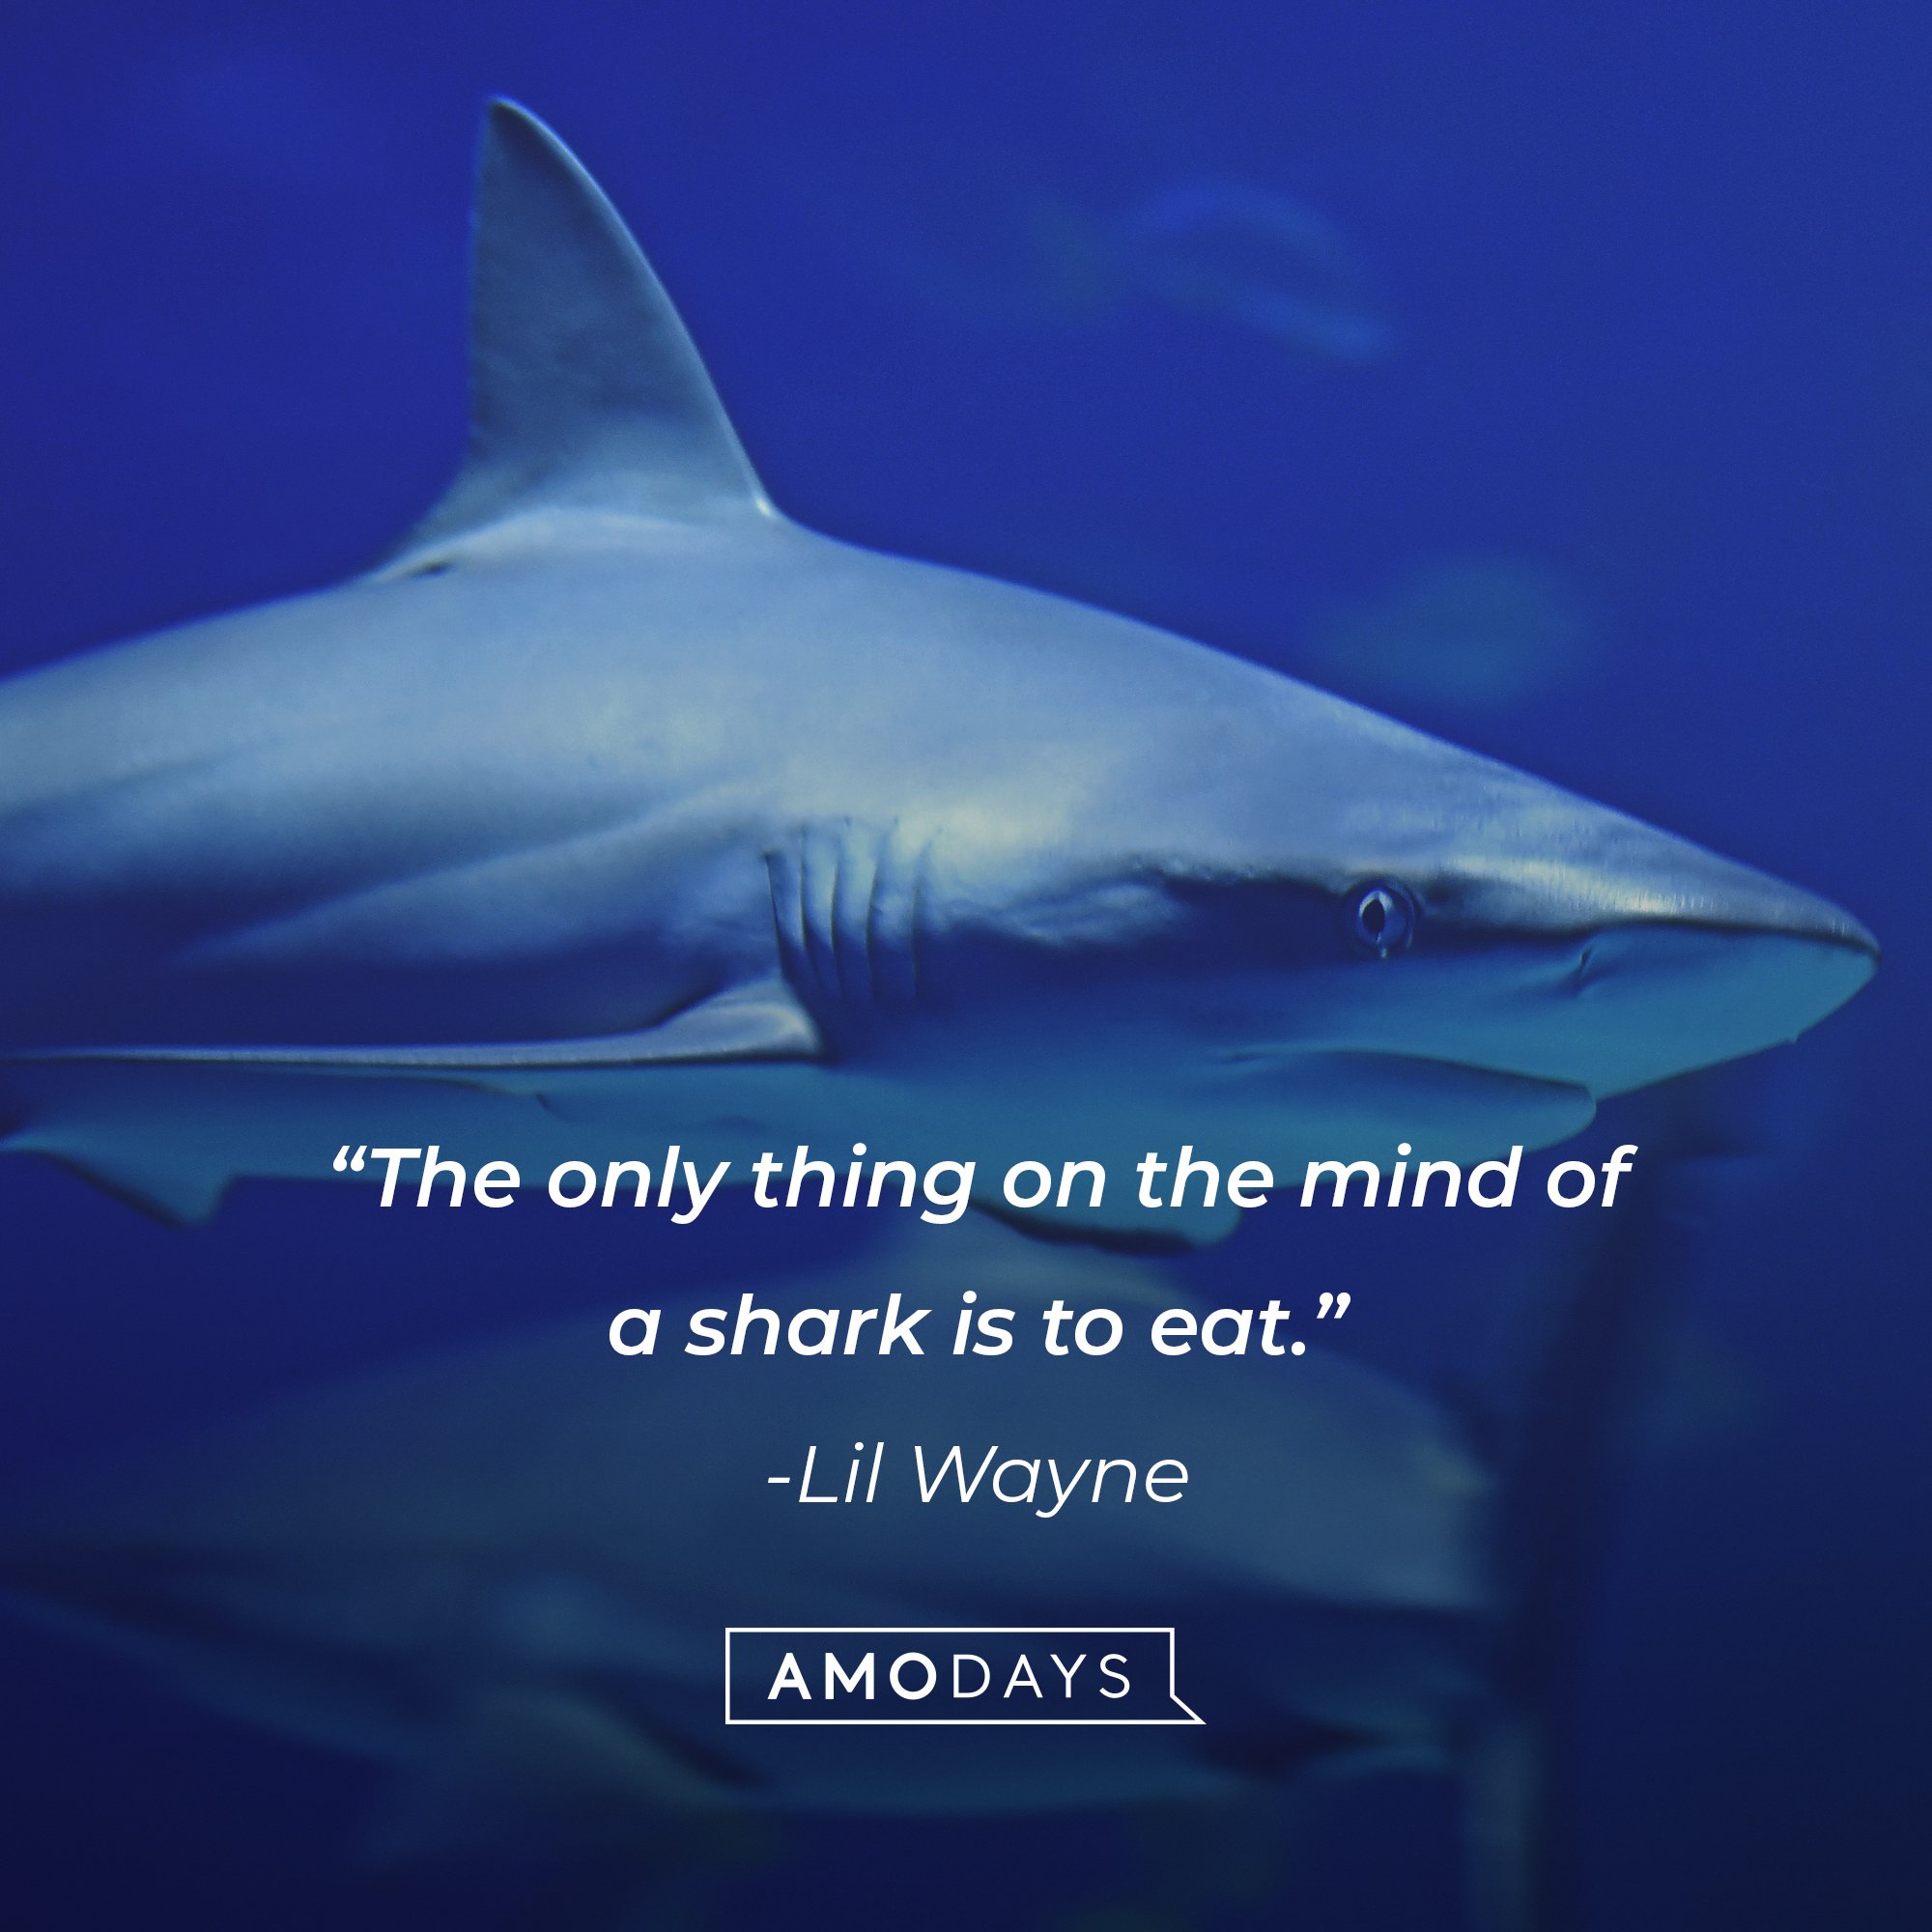 Lil Wayne's quote: “The only thing on the mind of a shark is to eat.” | Image: AmoDays